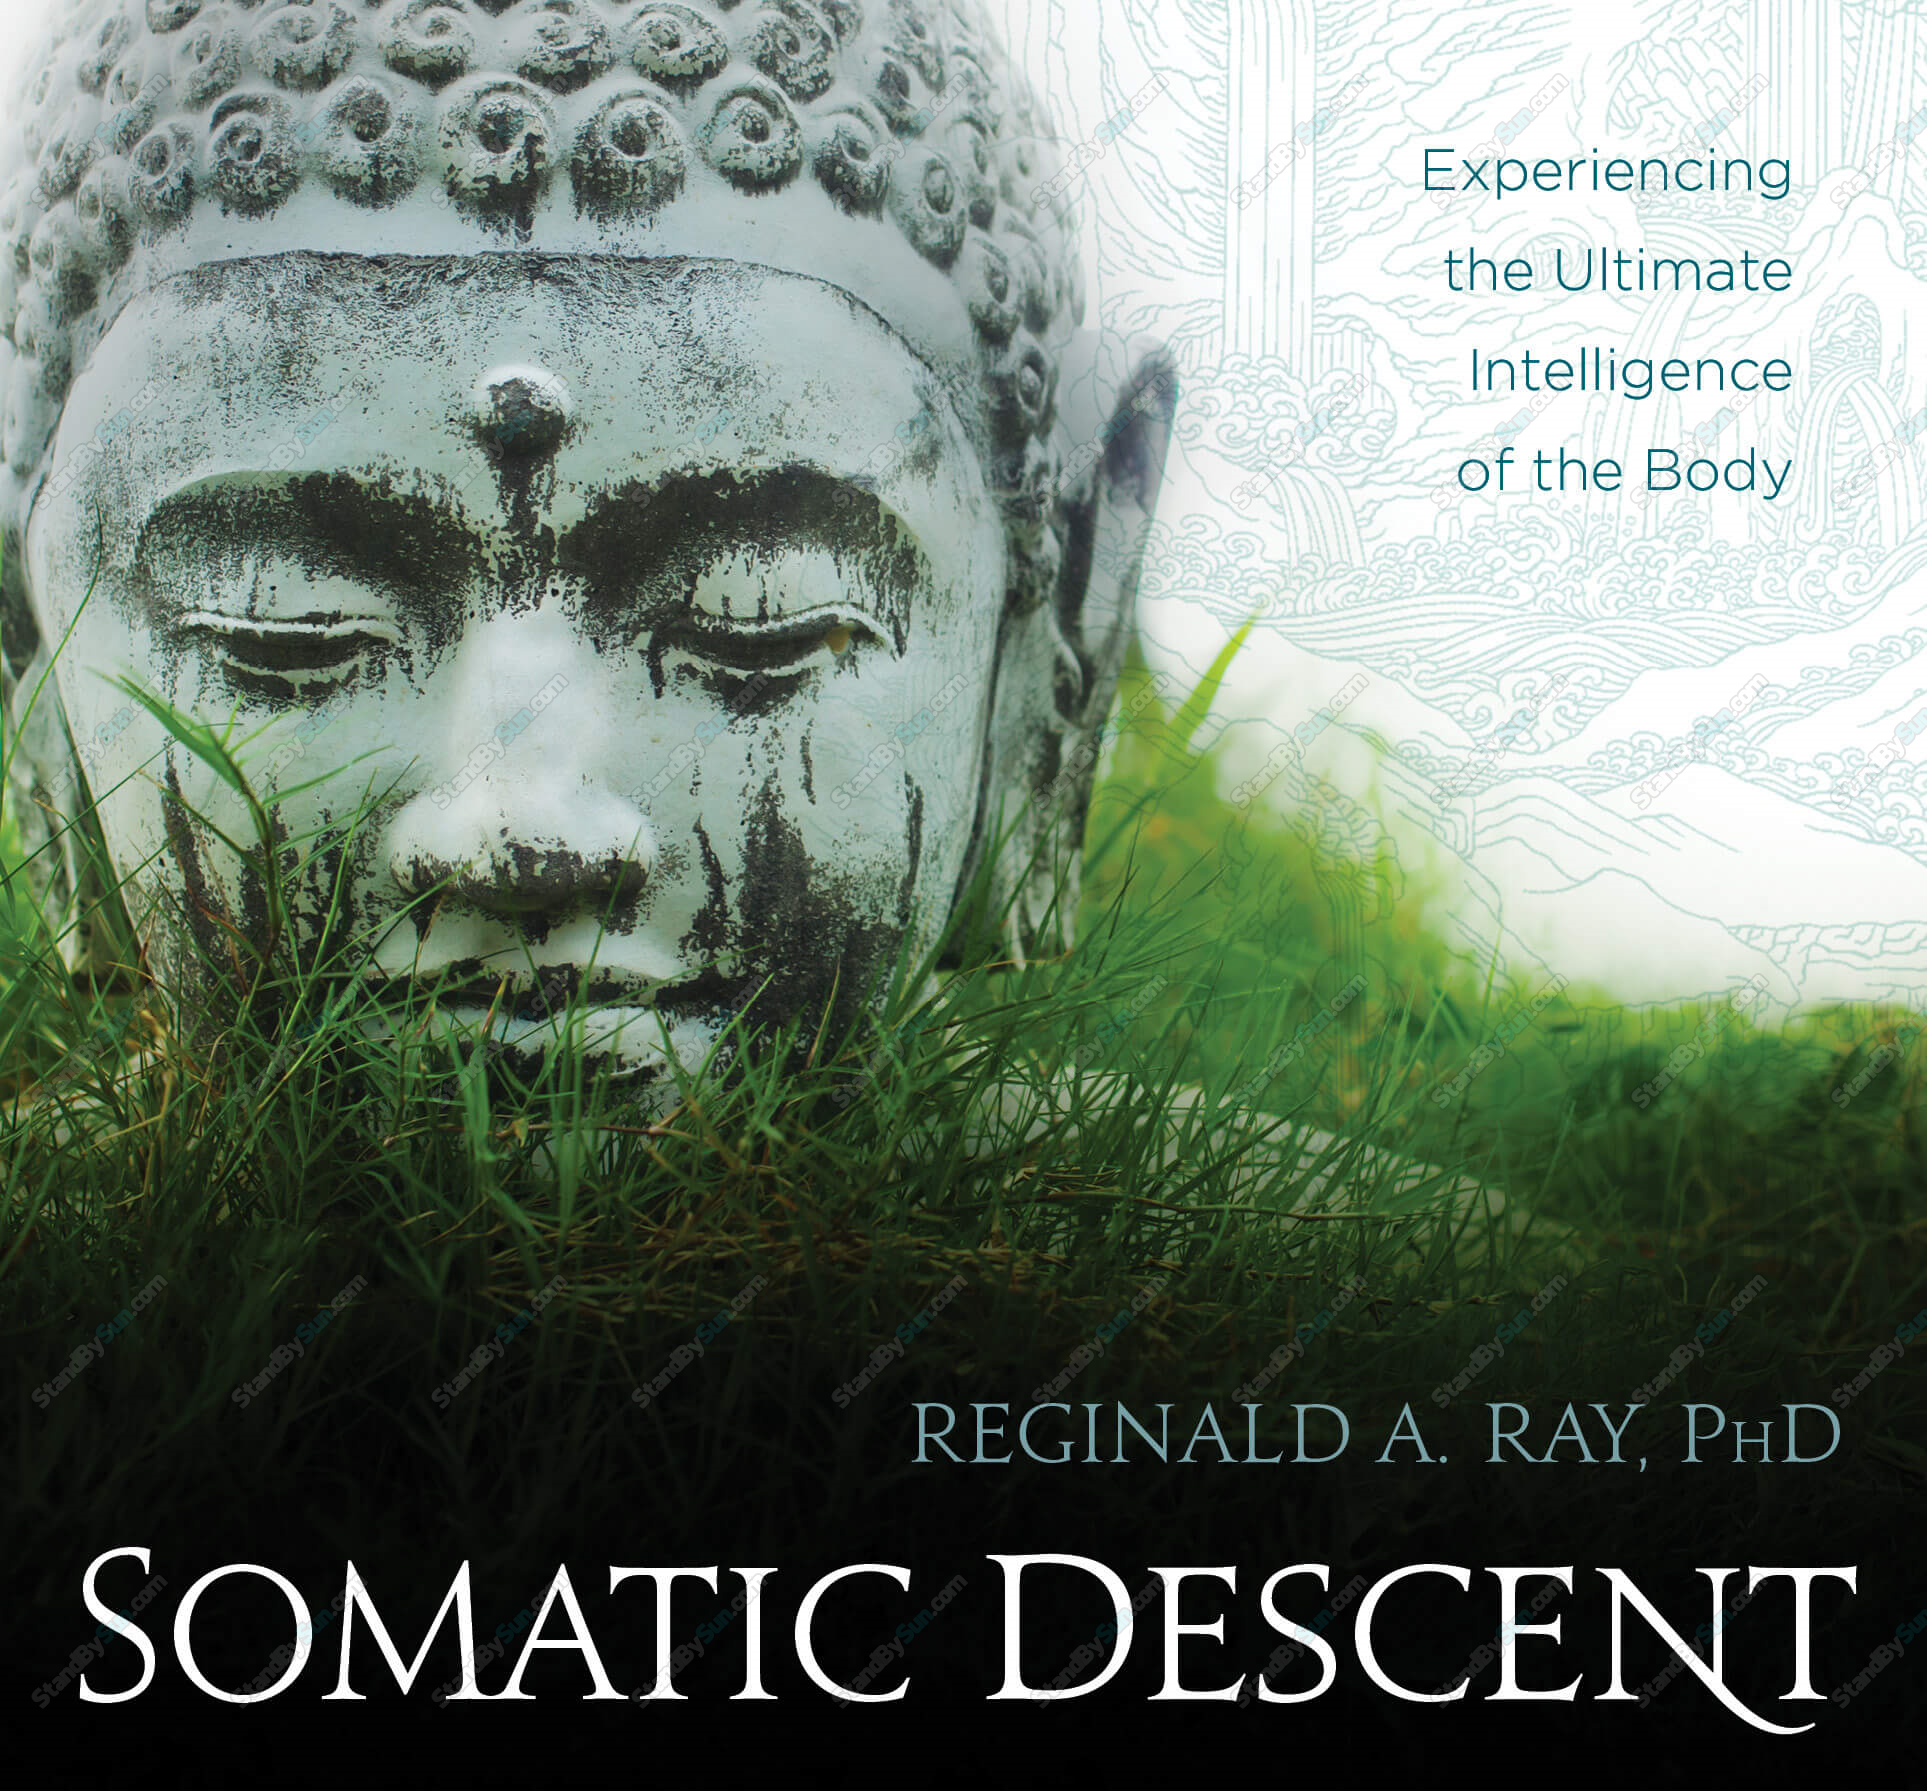 Reginald A. Ray - Somatic Descent Experiencing the Ultimate Intelligence of the Body